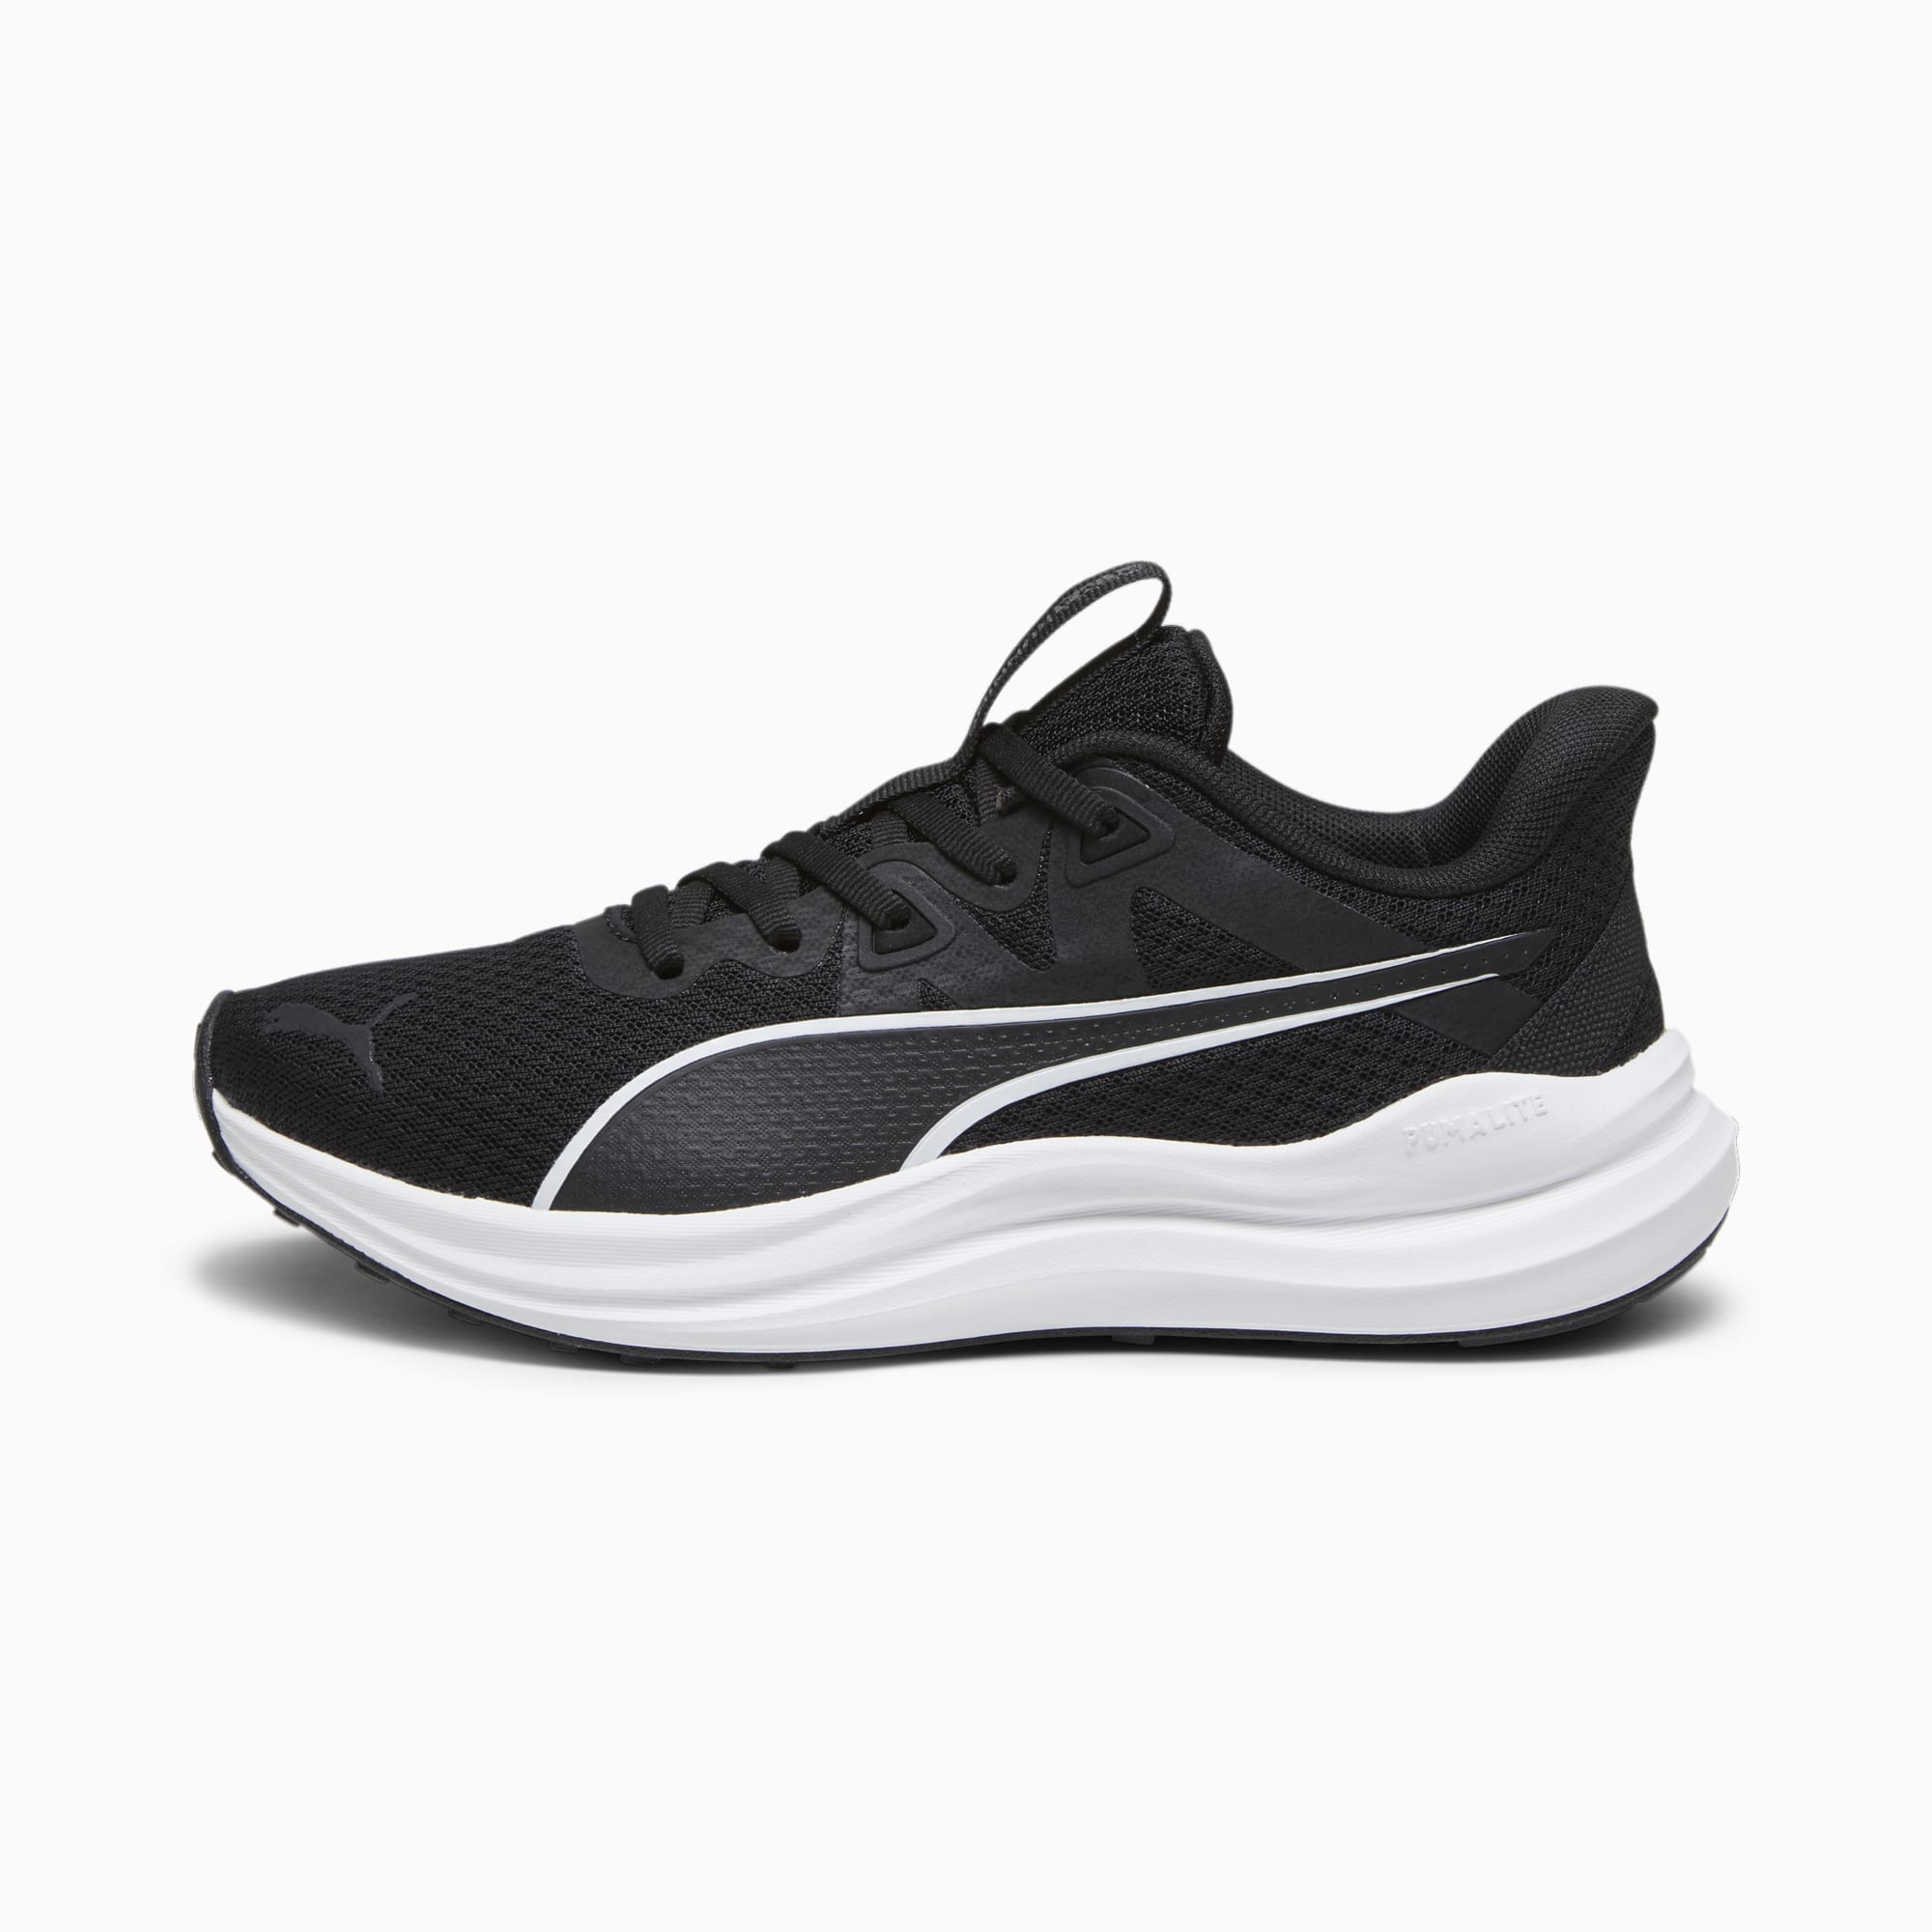 PUMA Reflect Lite Youth Running Shoes, Black/White, Size 35,5, Shoes